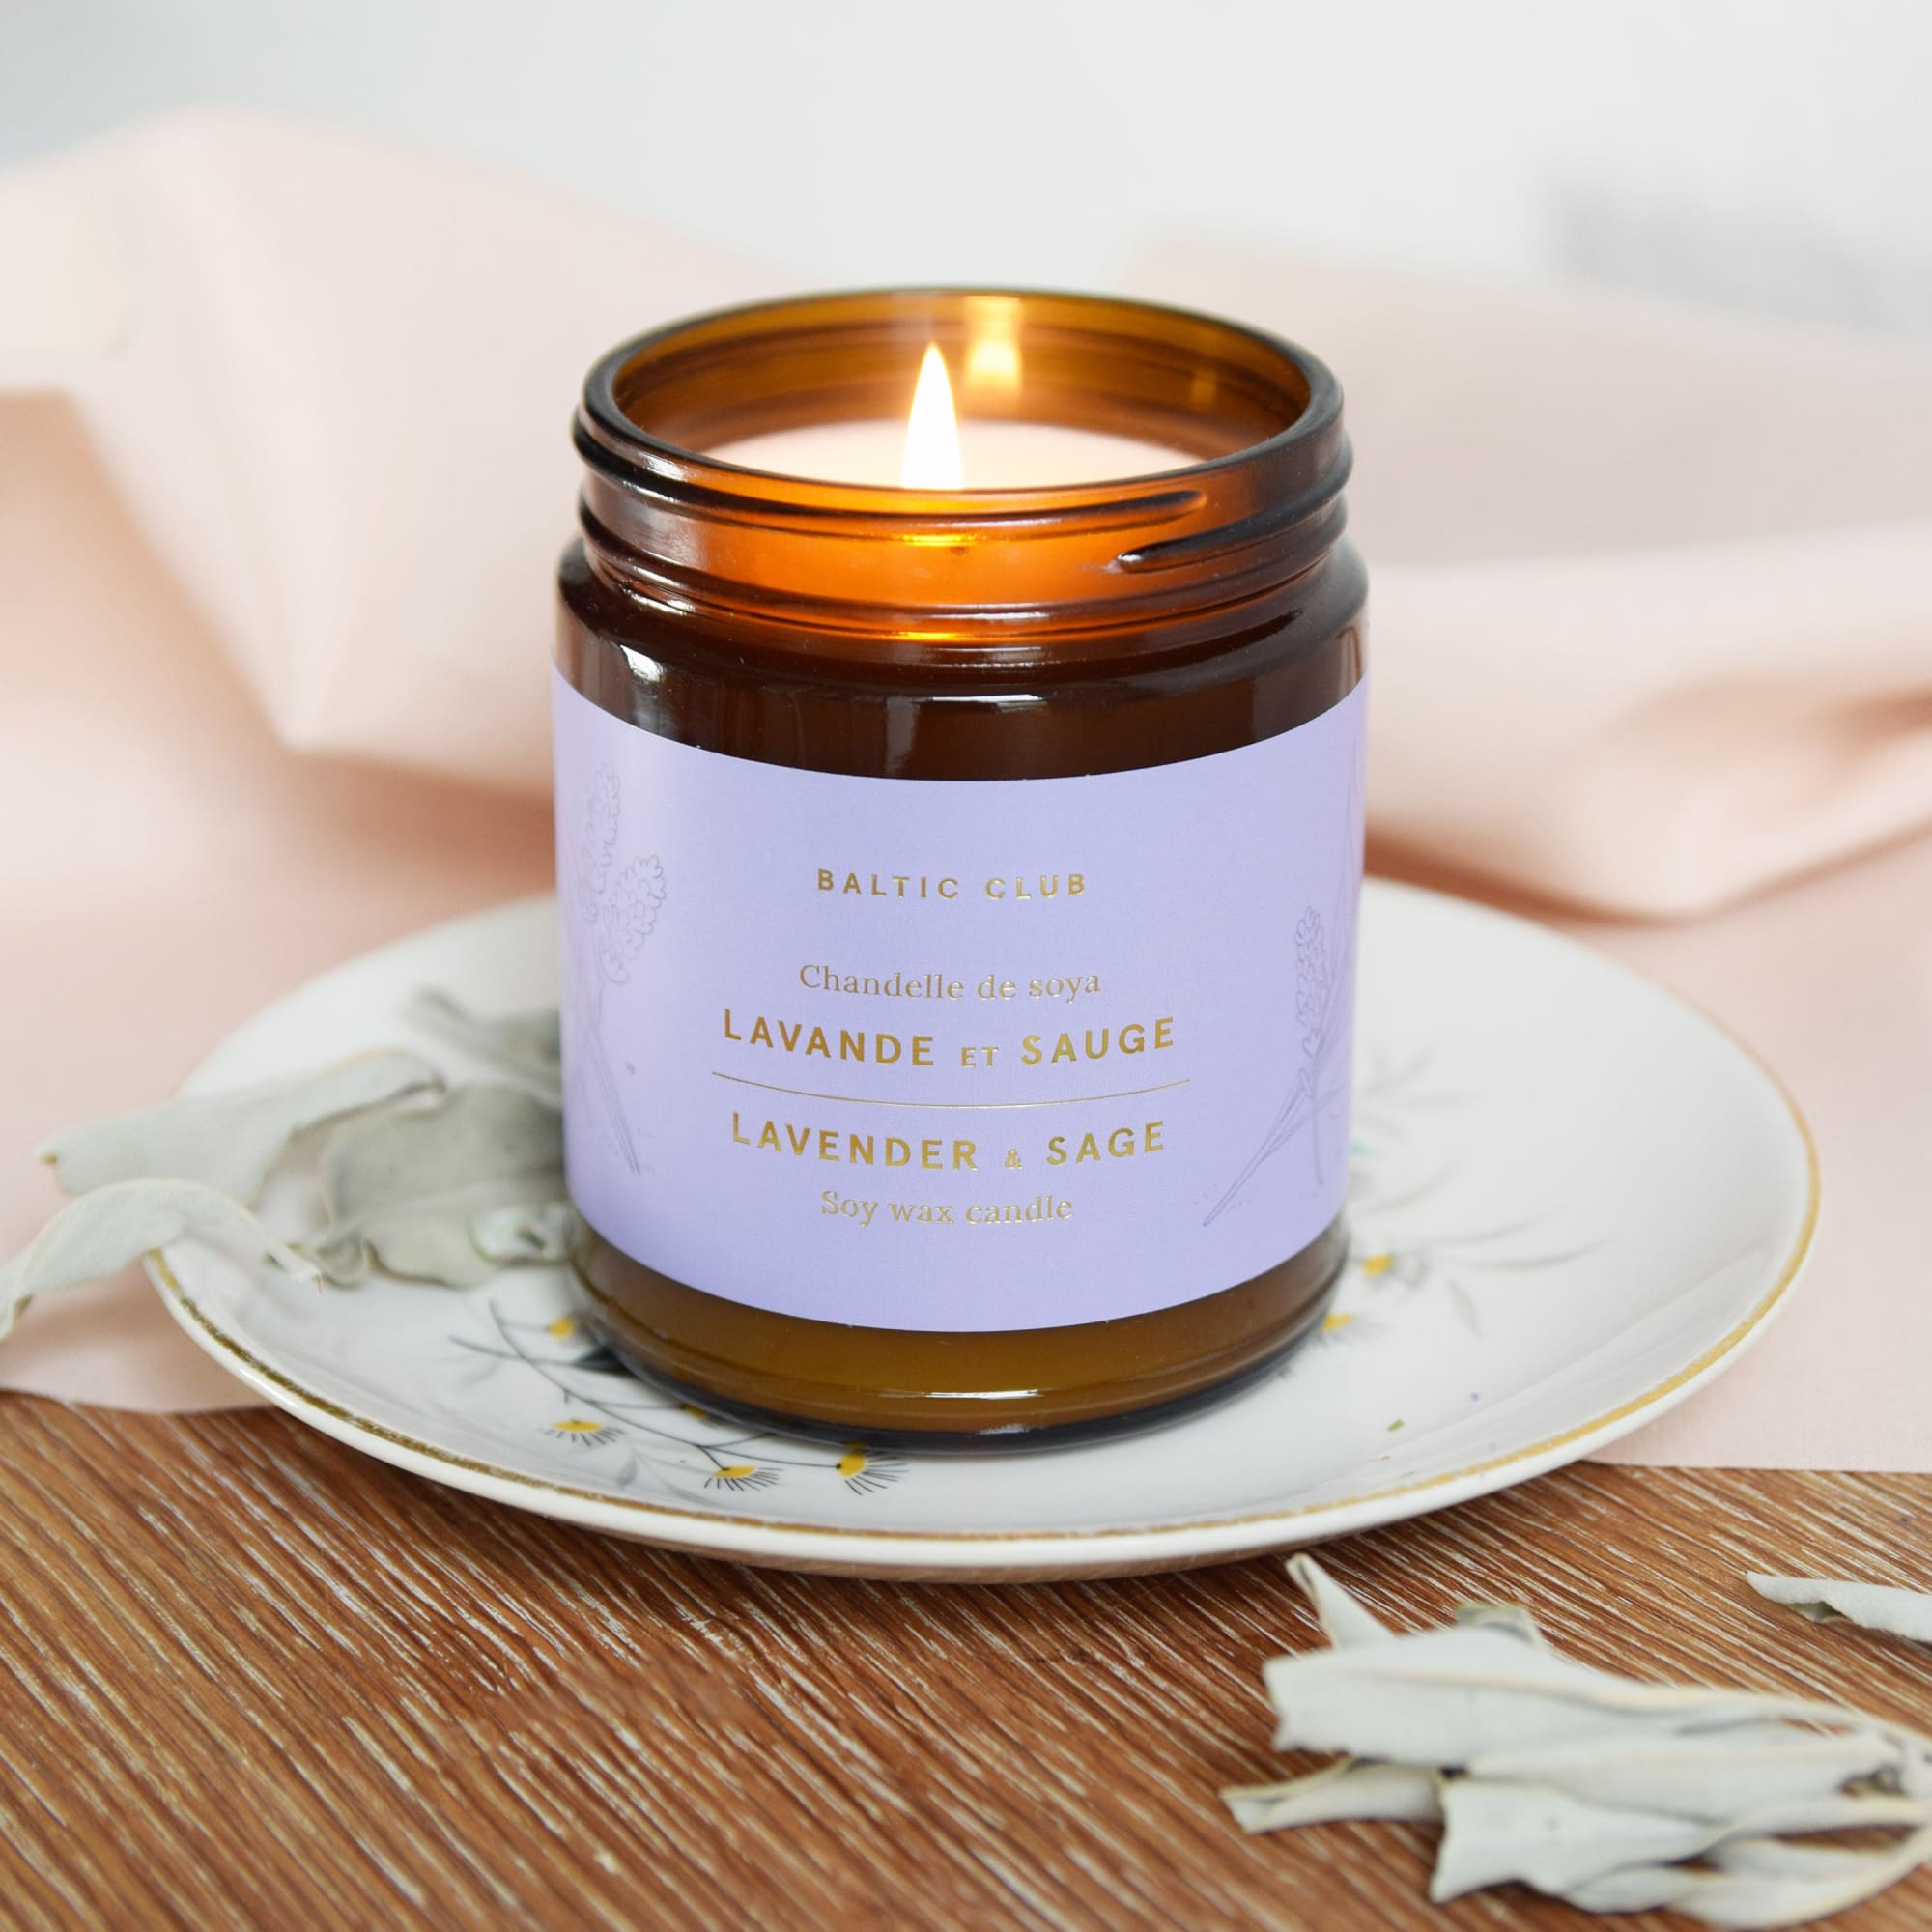 The Baltic Club's Lavender & Sage Soy Candle lit